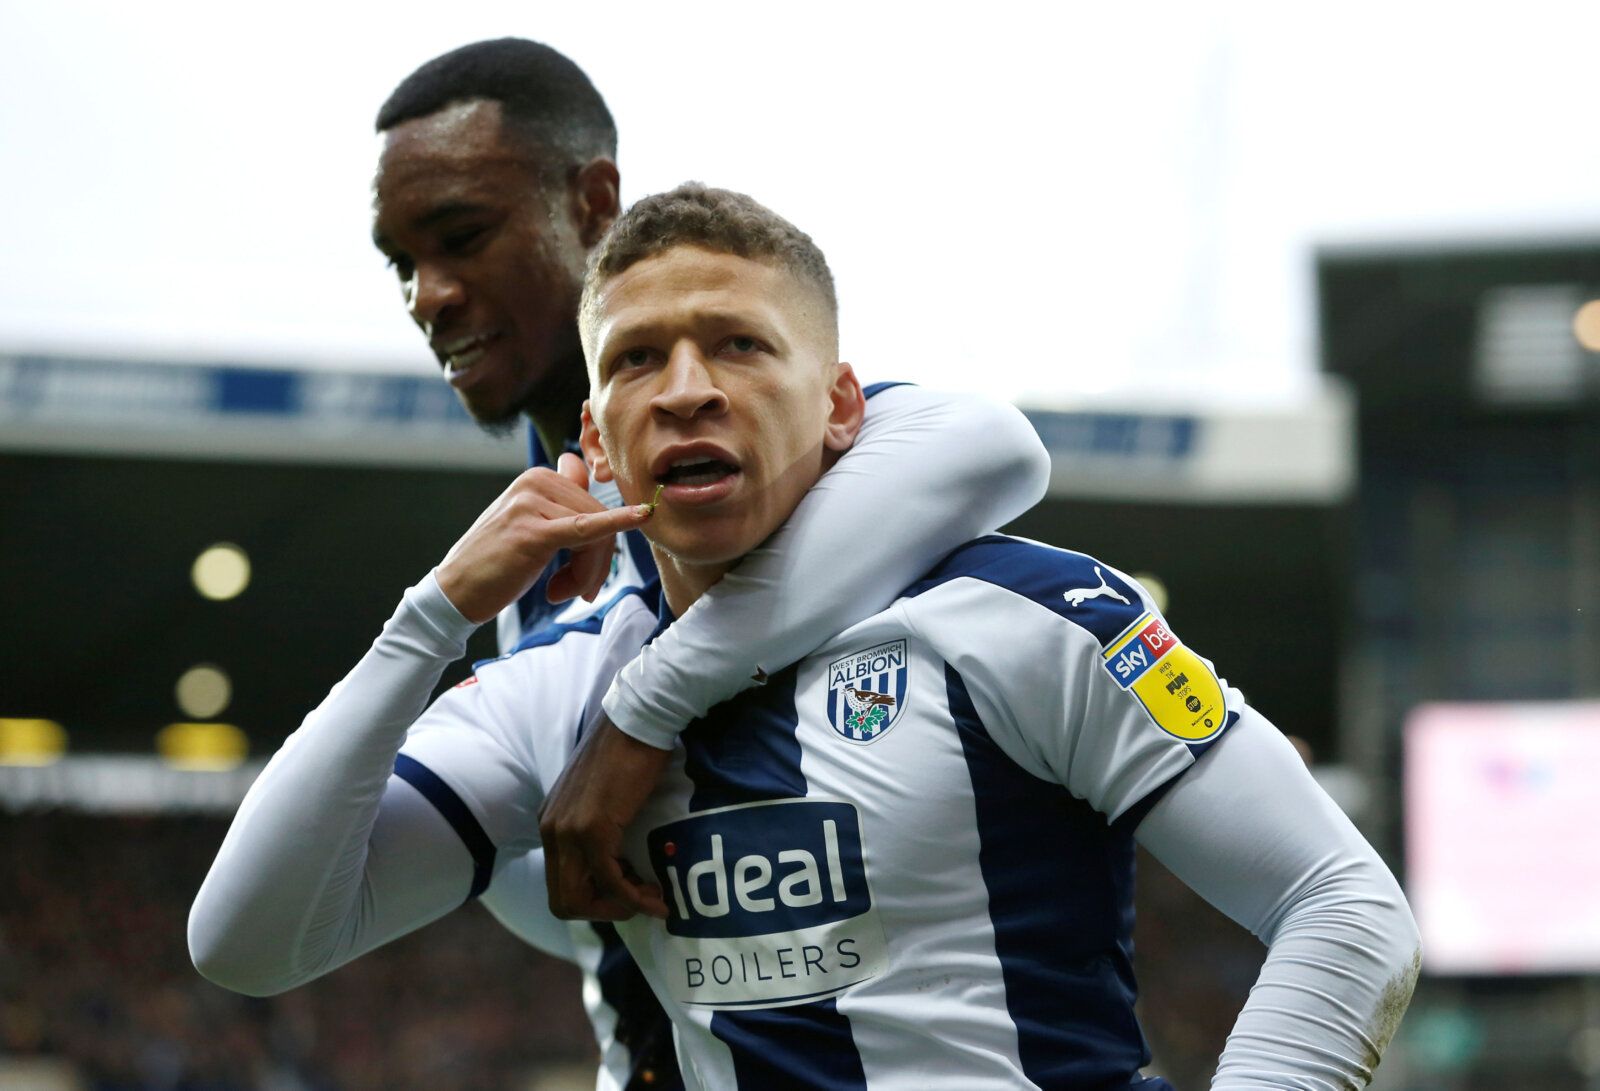 Soccer Football - Championship - West Bromwich Albion v Norwich City - The Hawthorns, West Bromwich, Britain - January 12, 2019  West Bromwich Albion's Dwight Gayle celebrates scoring their first goal   Action Images/Ed Sykes  EDITORIAL USE ONLY. No use with unauthorized audio, video, data, fixture lists, club/league logos or 